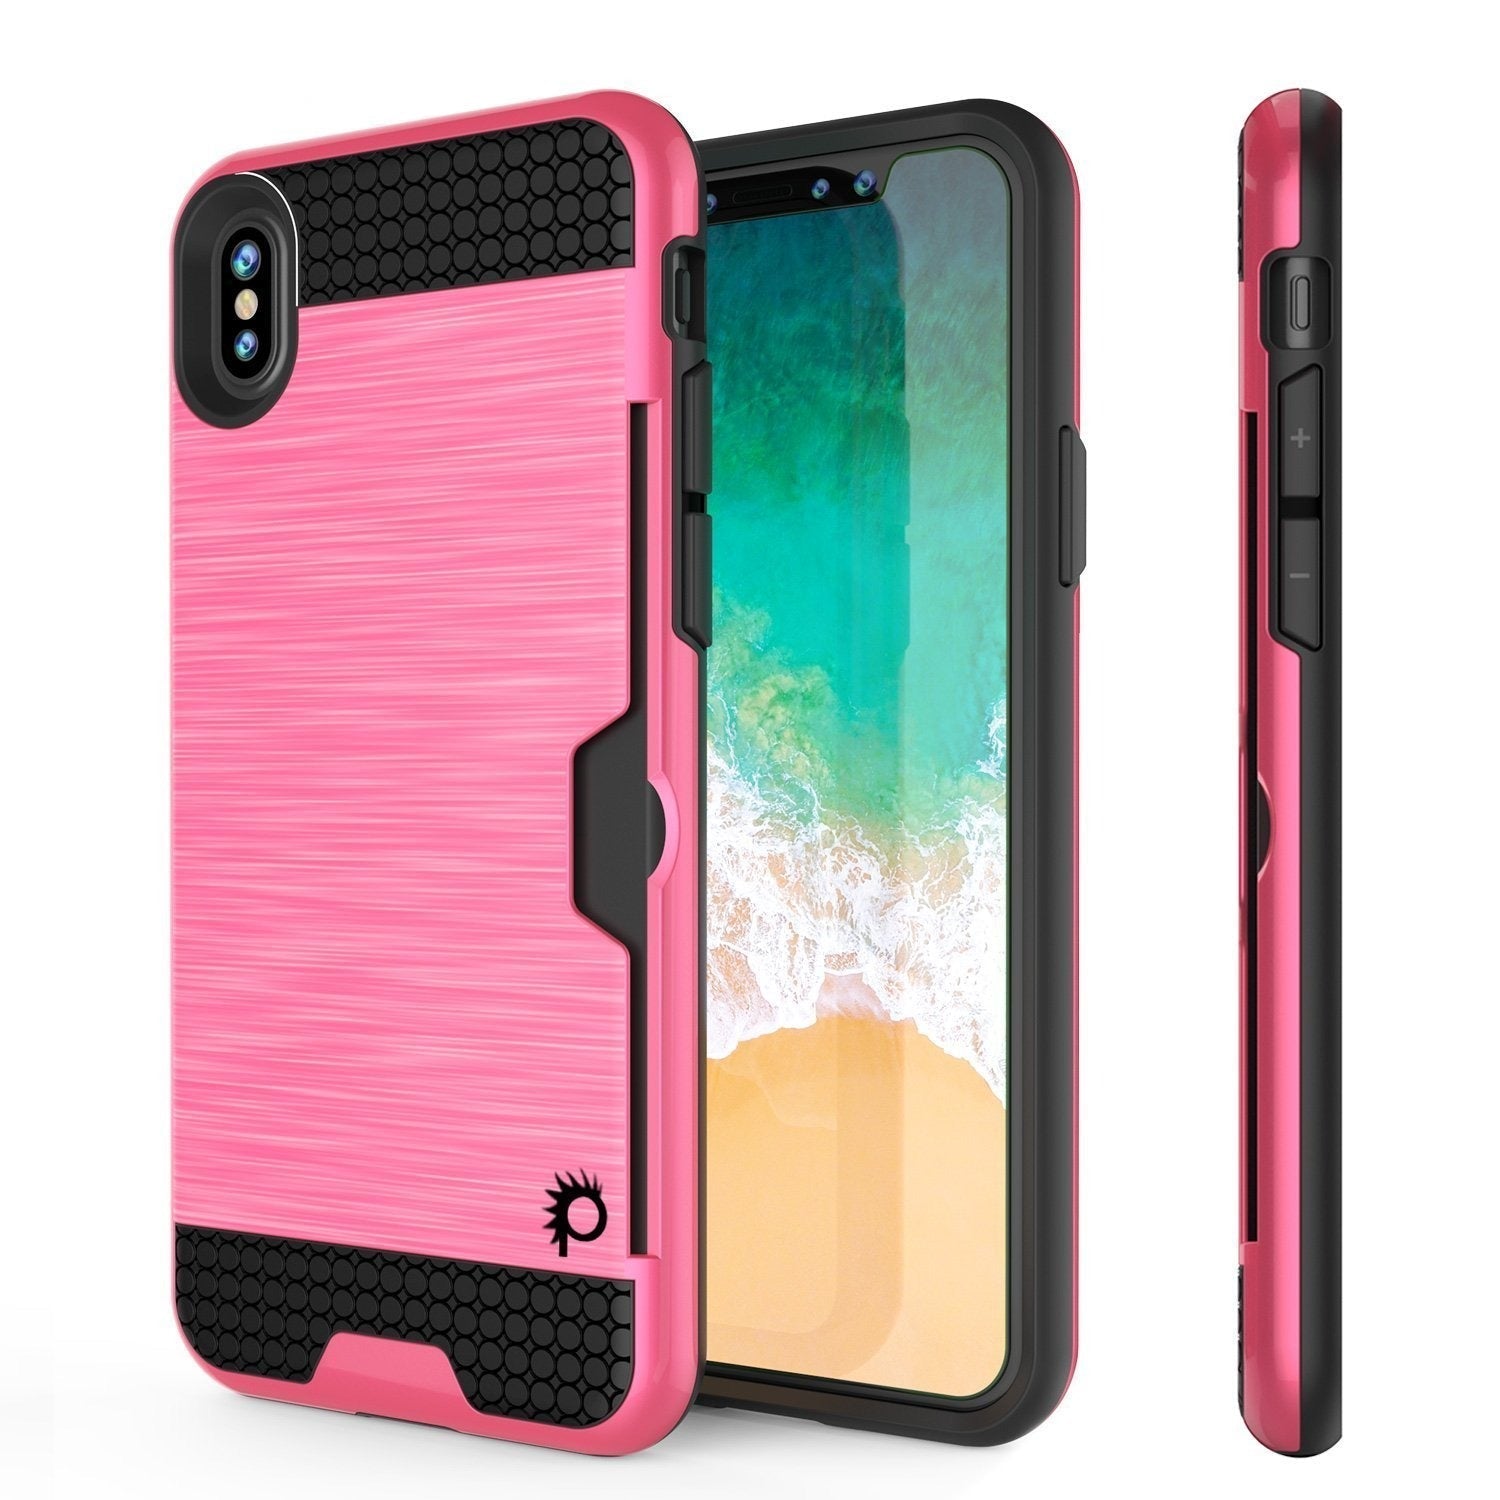 iPhone XR Case, PUNKcase [SLOT Series] Slim Fit Dual-Layer Armor Cover [Pink] (Color in image: Pink)